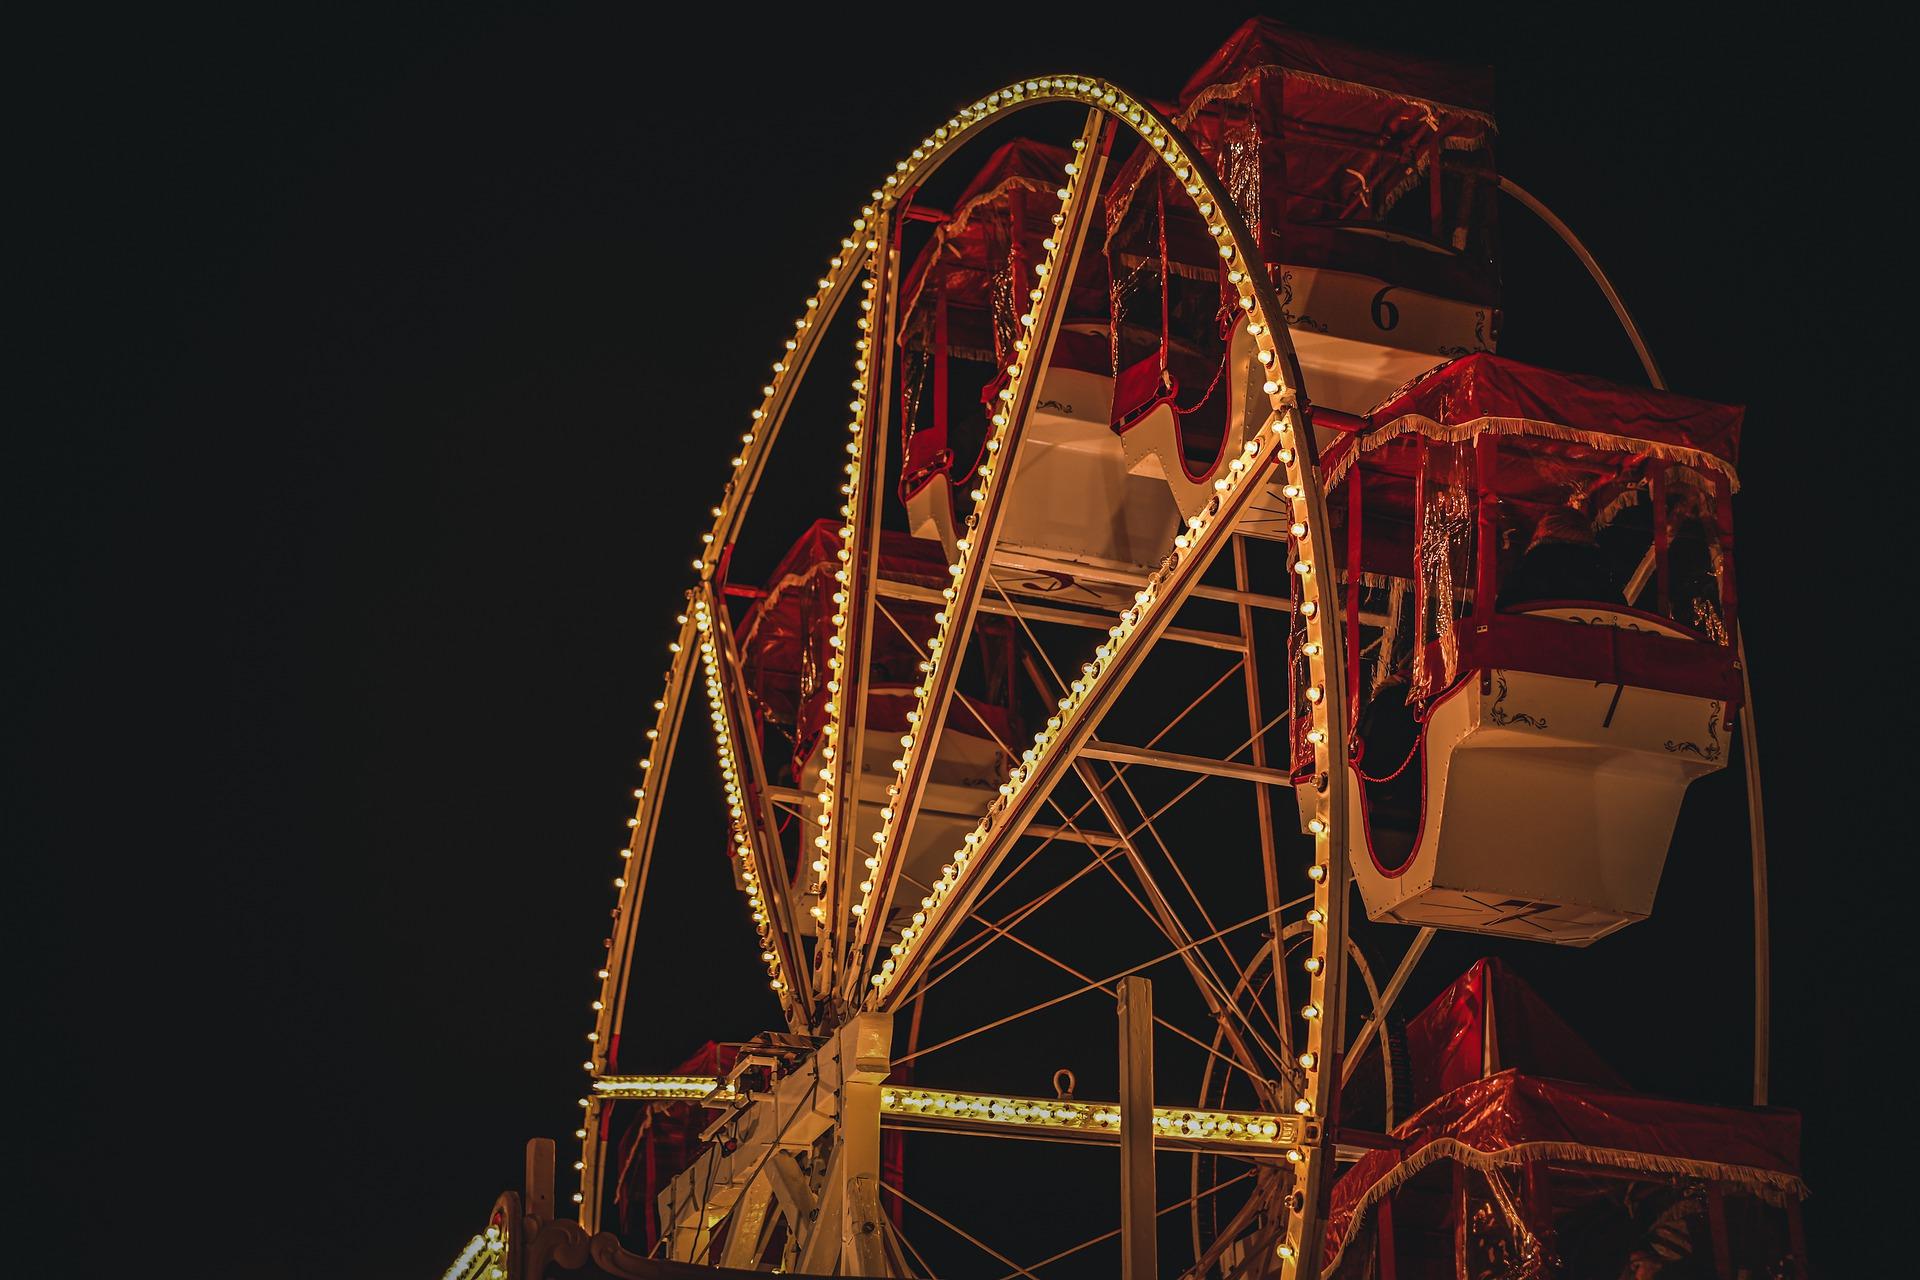 Image of a ferris wheel at night